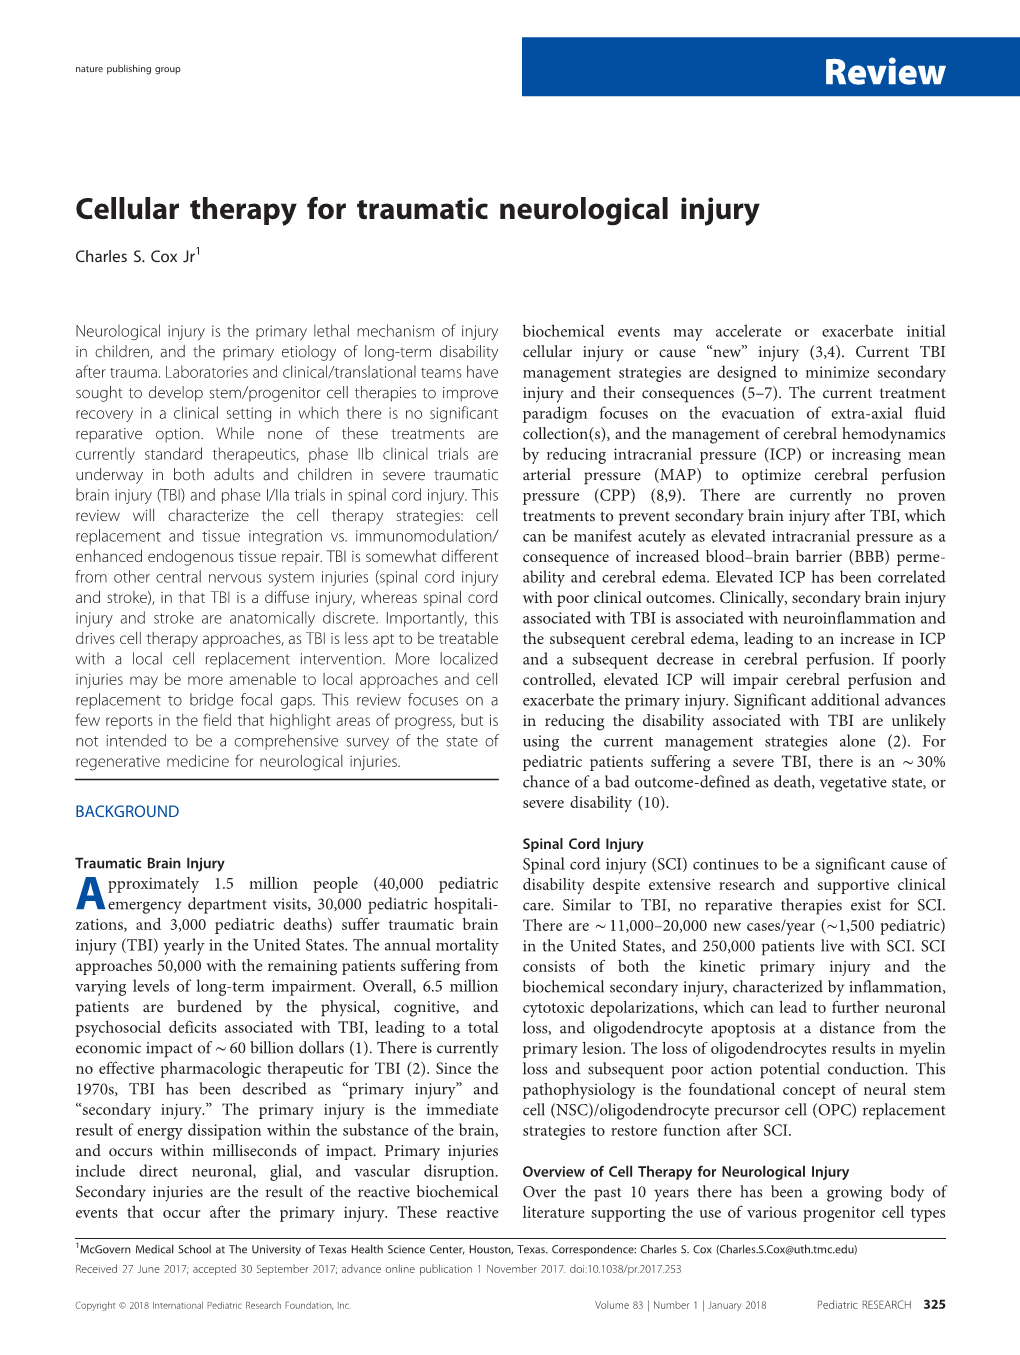 Cellular Therapy for Traumatic Neurological Injury